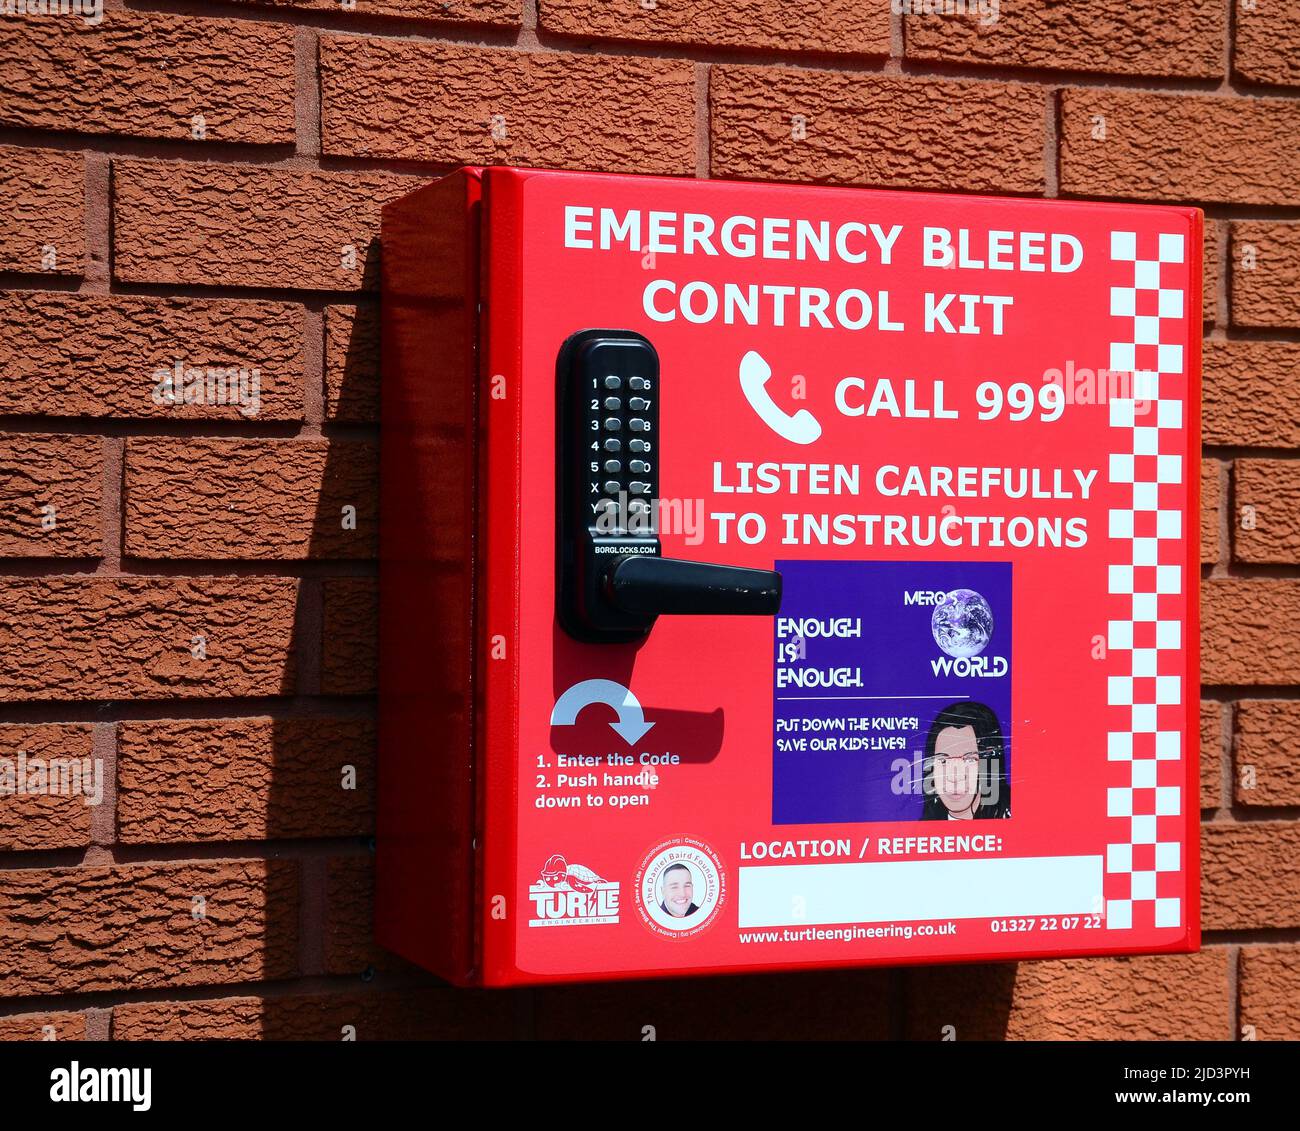 Emergency bleed control kit mounted in a red box on a brick wall with instructions on the front to call 999 emergency line in Manchester, England, UK. Stock Photo